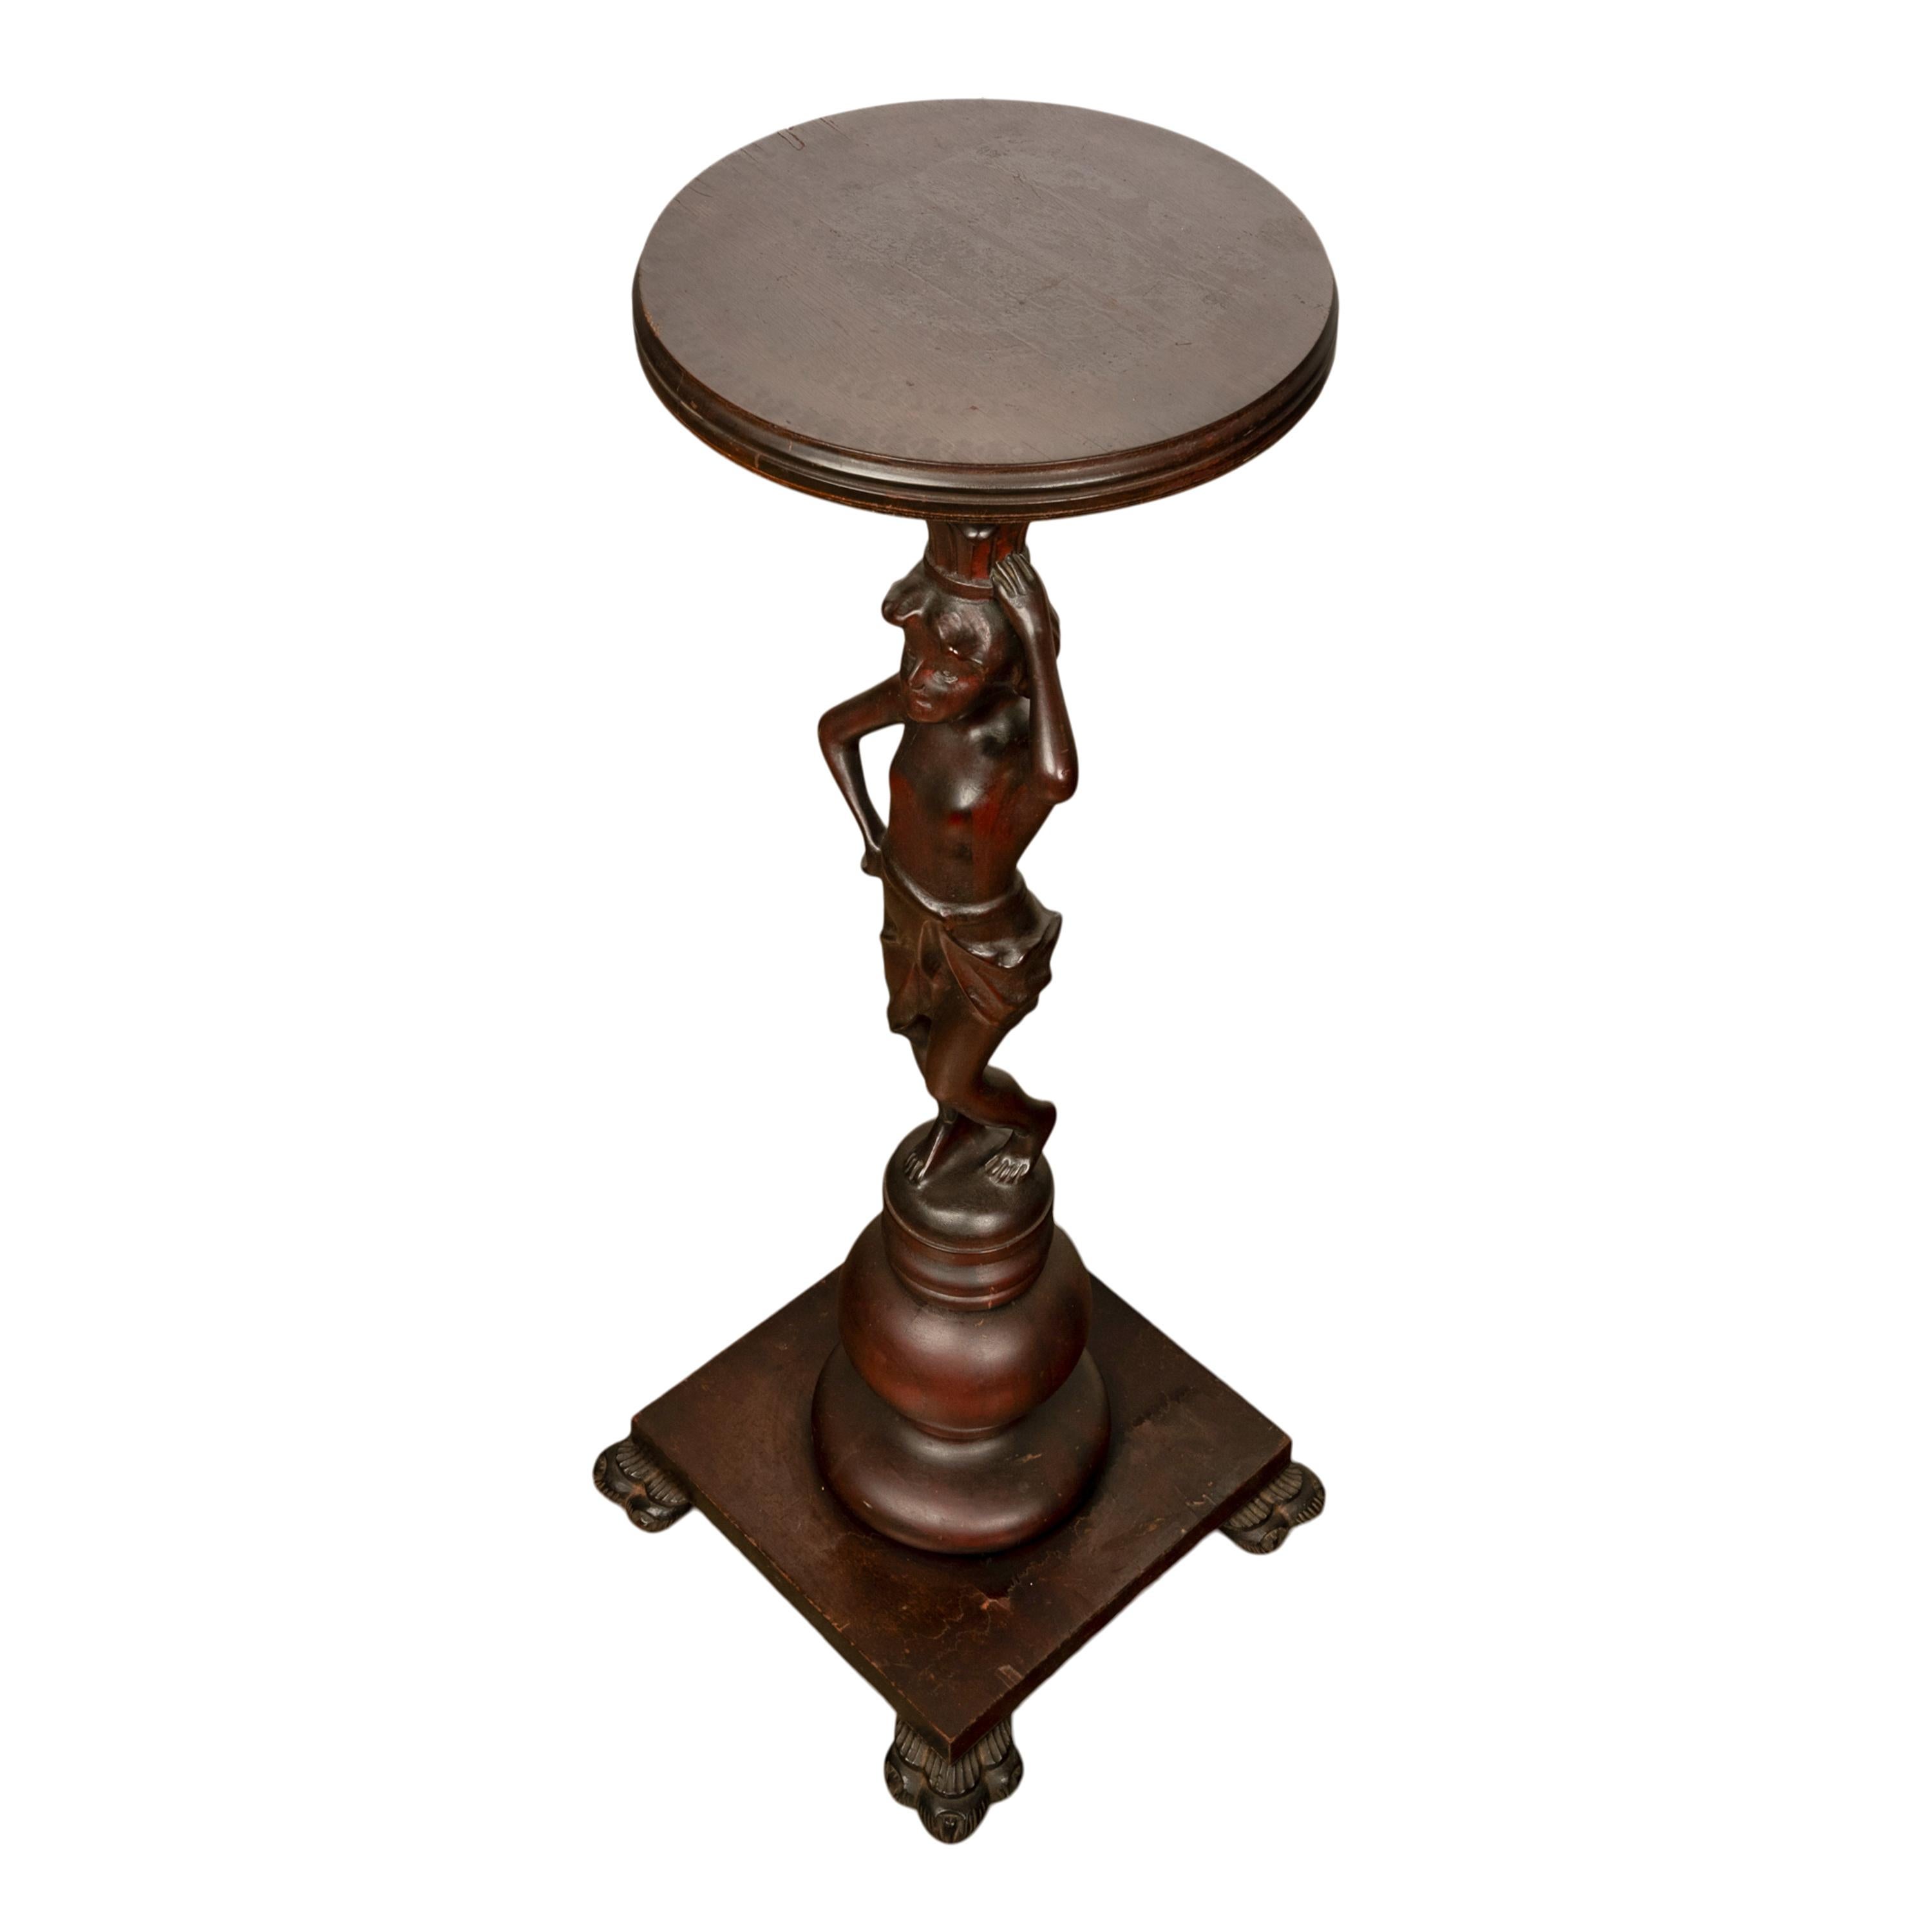 Antique Italian Carved Walnut Statue Pedestal Wine Candle Lamp Stand Table 1900 For Sale 2